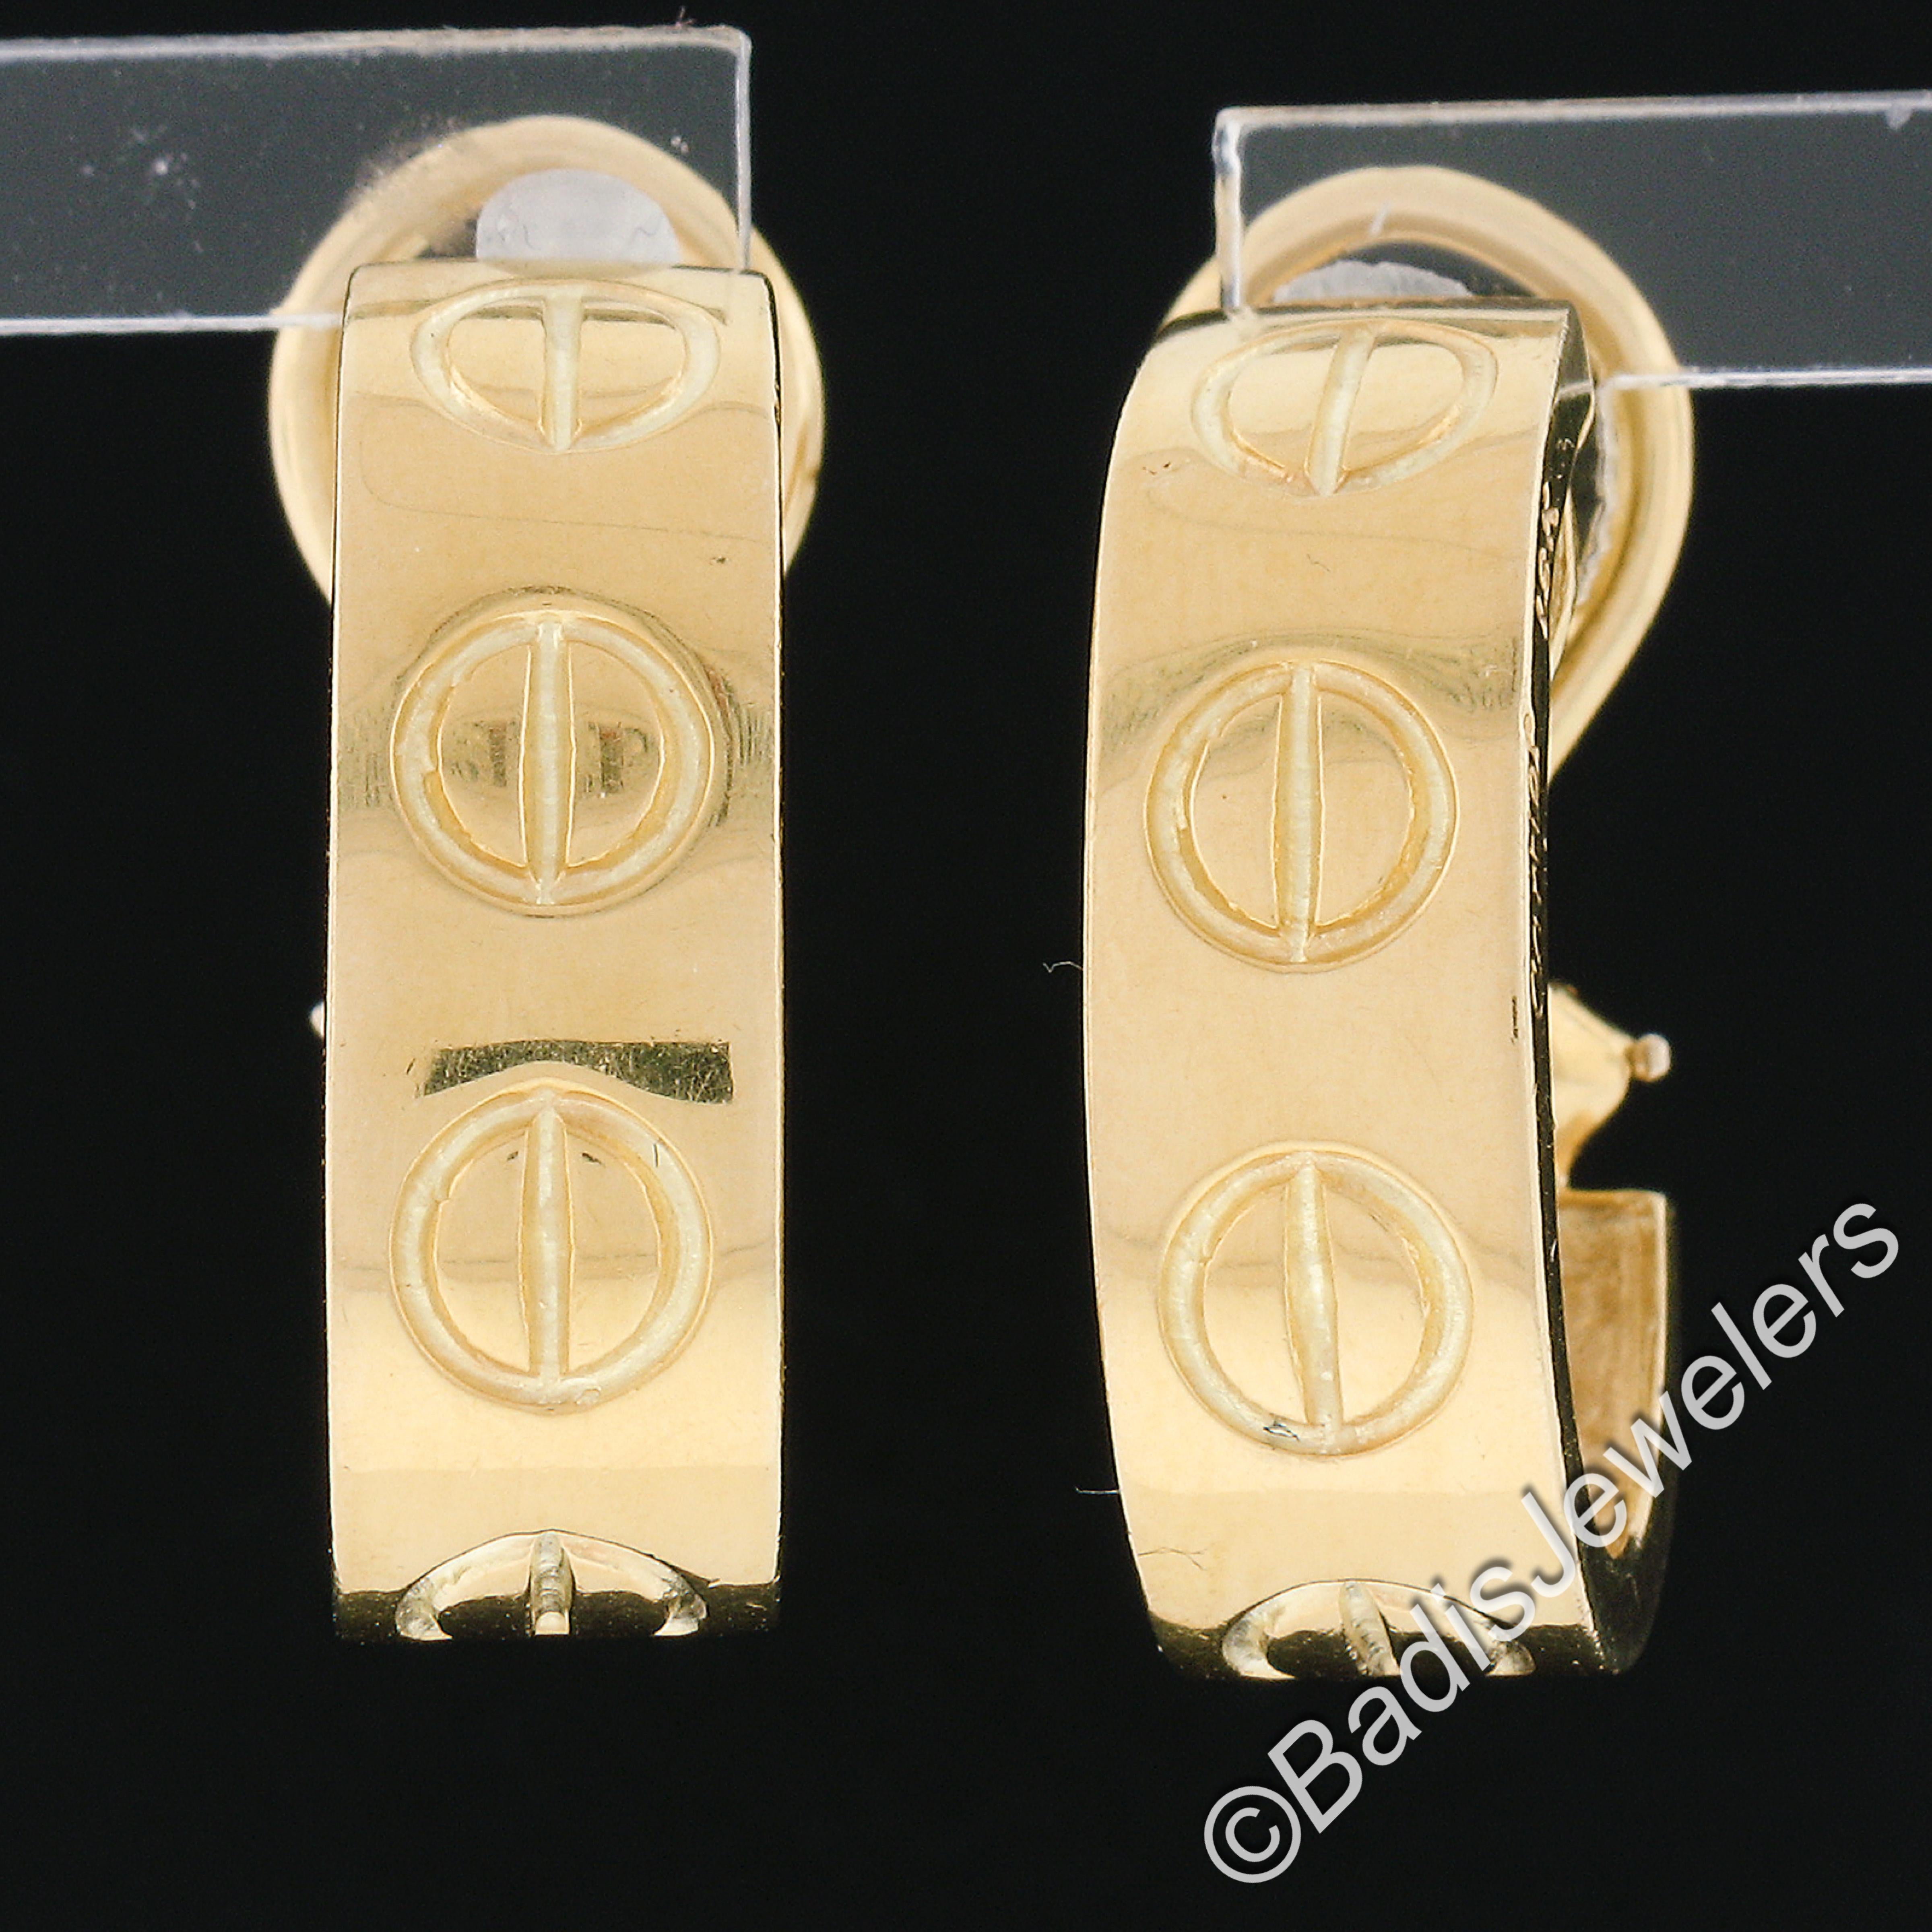 This rare vintage Cartier Love pair of earrings is crafted in solid 18k yellow gold and signed properly with the old Cartier cursive signature style. They have their original finish intact and they remain in excellent physical condition. They